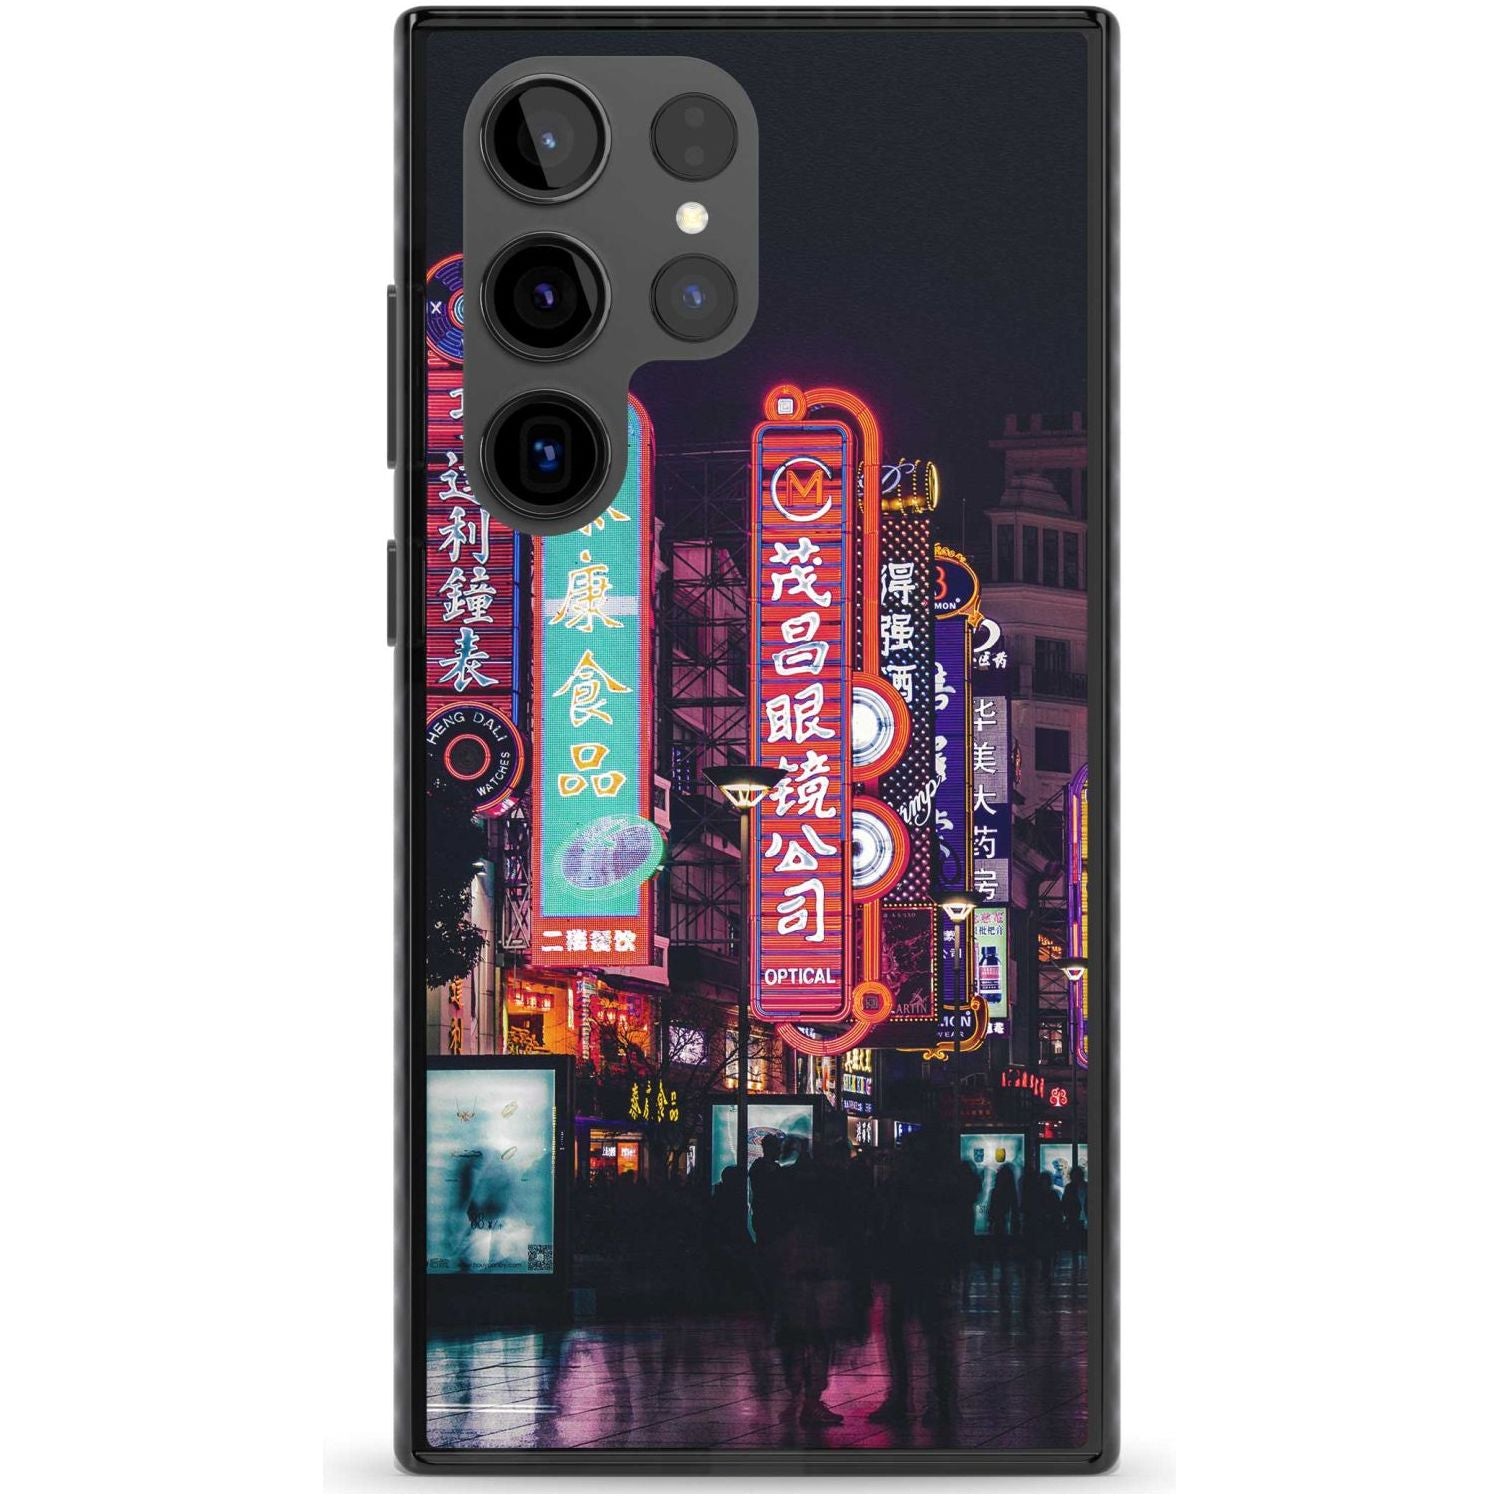 Busy Street - Neon Cities Photographs Phone Case Samsung S22 Ultra / Black Impact Case,Samsung S23 Ultra / Black Impact Case Blanc Space